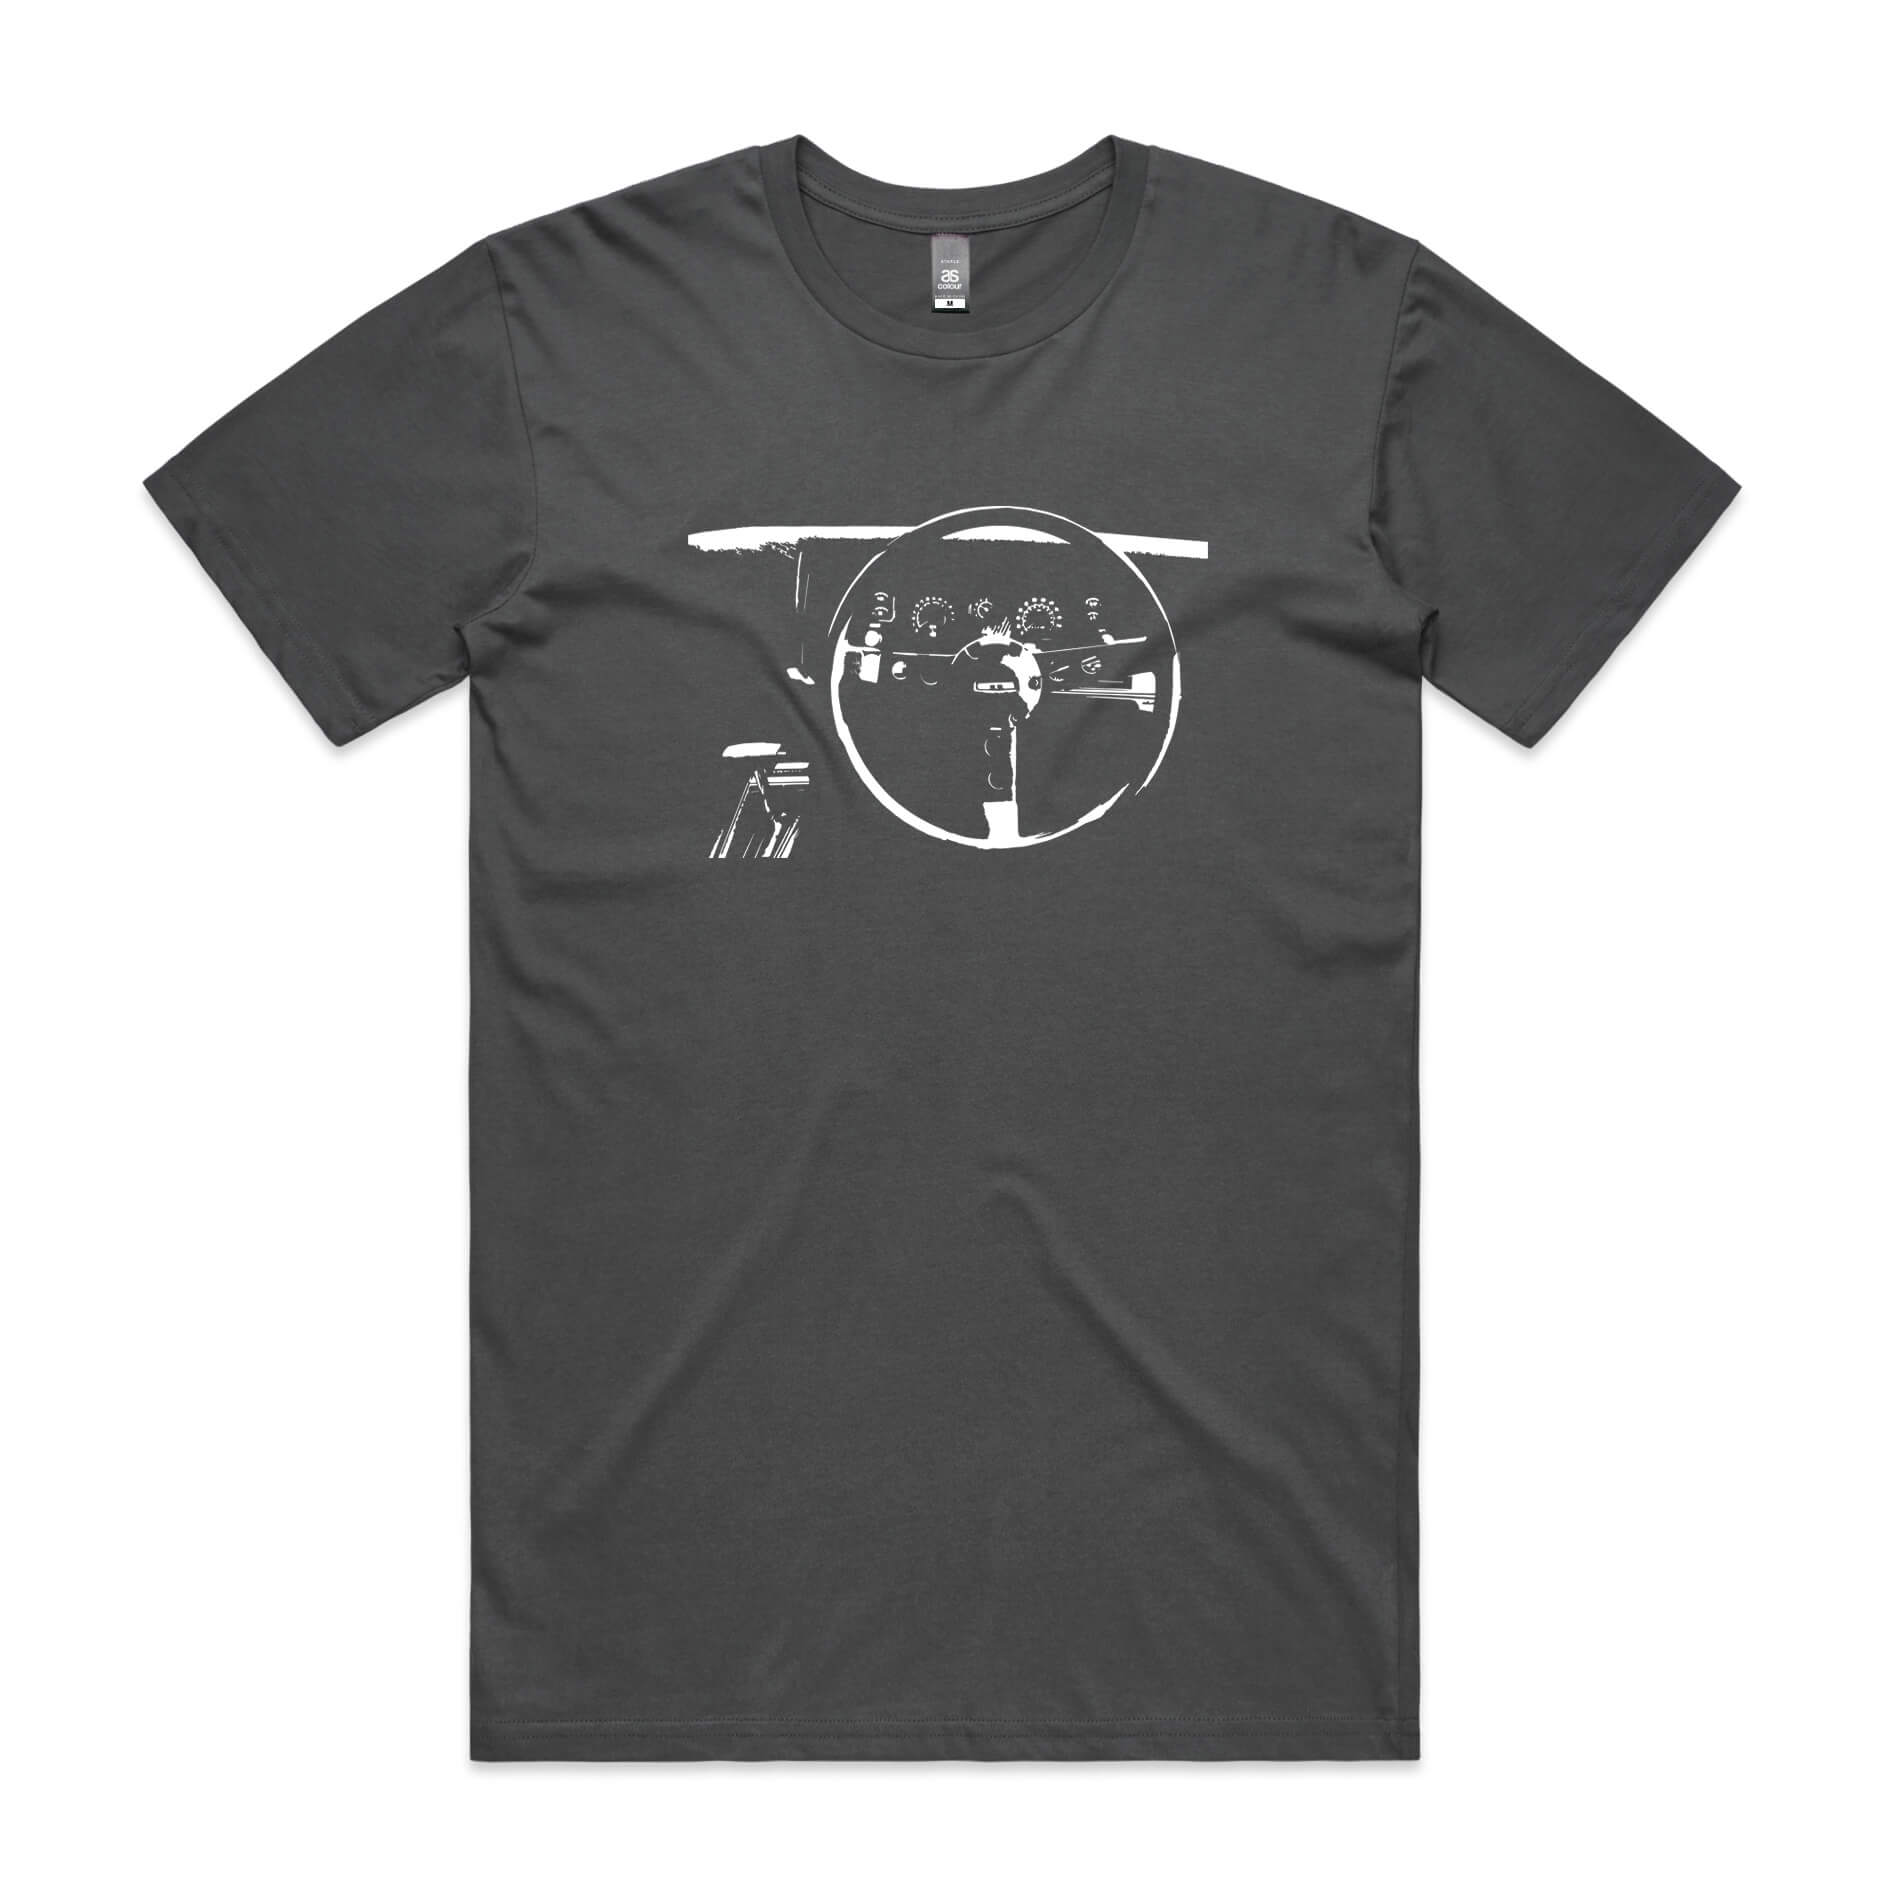 Holden HQ Monaro dash t-shirt in charcoal grey with white car dashboard design